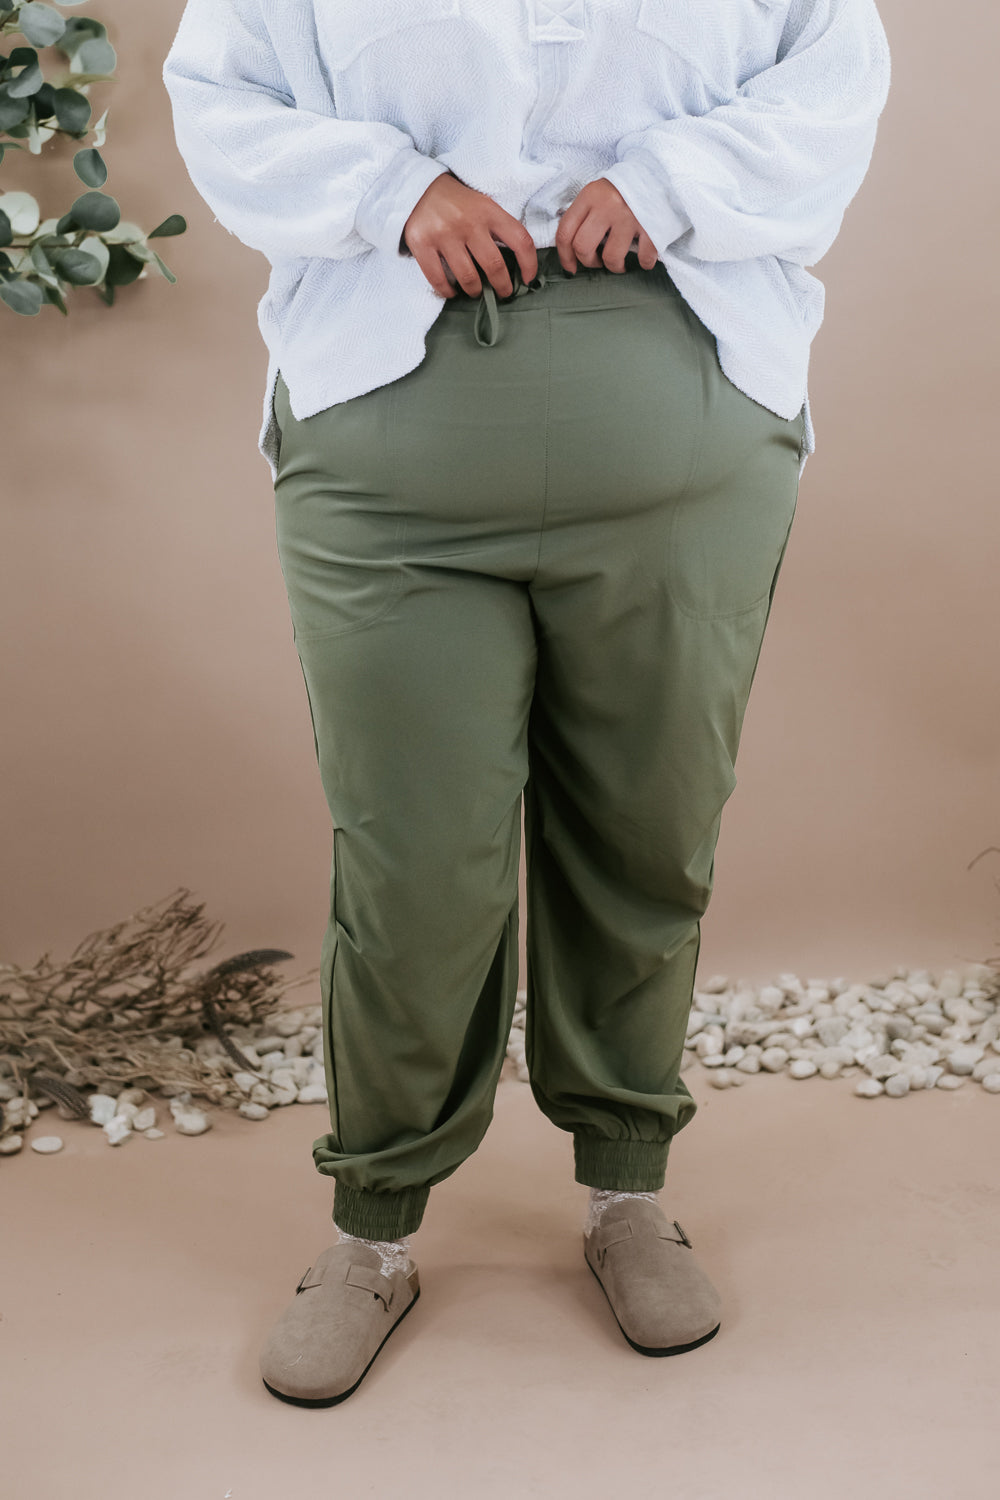 Everyday Chic Boutique Jump to It Jogger, Olive XL